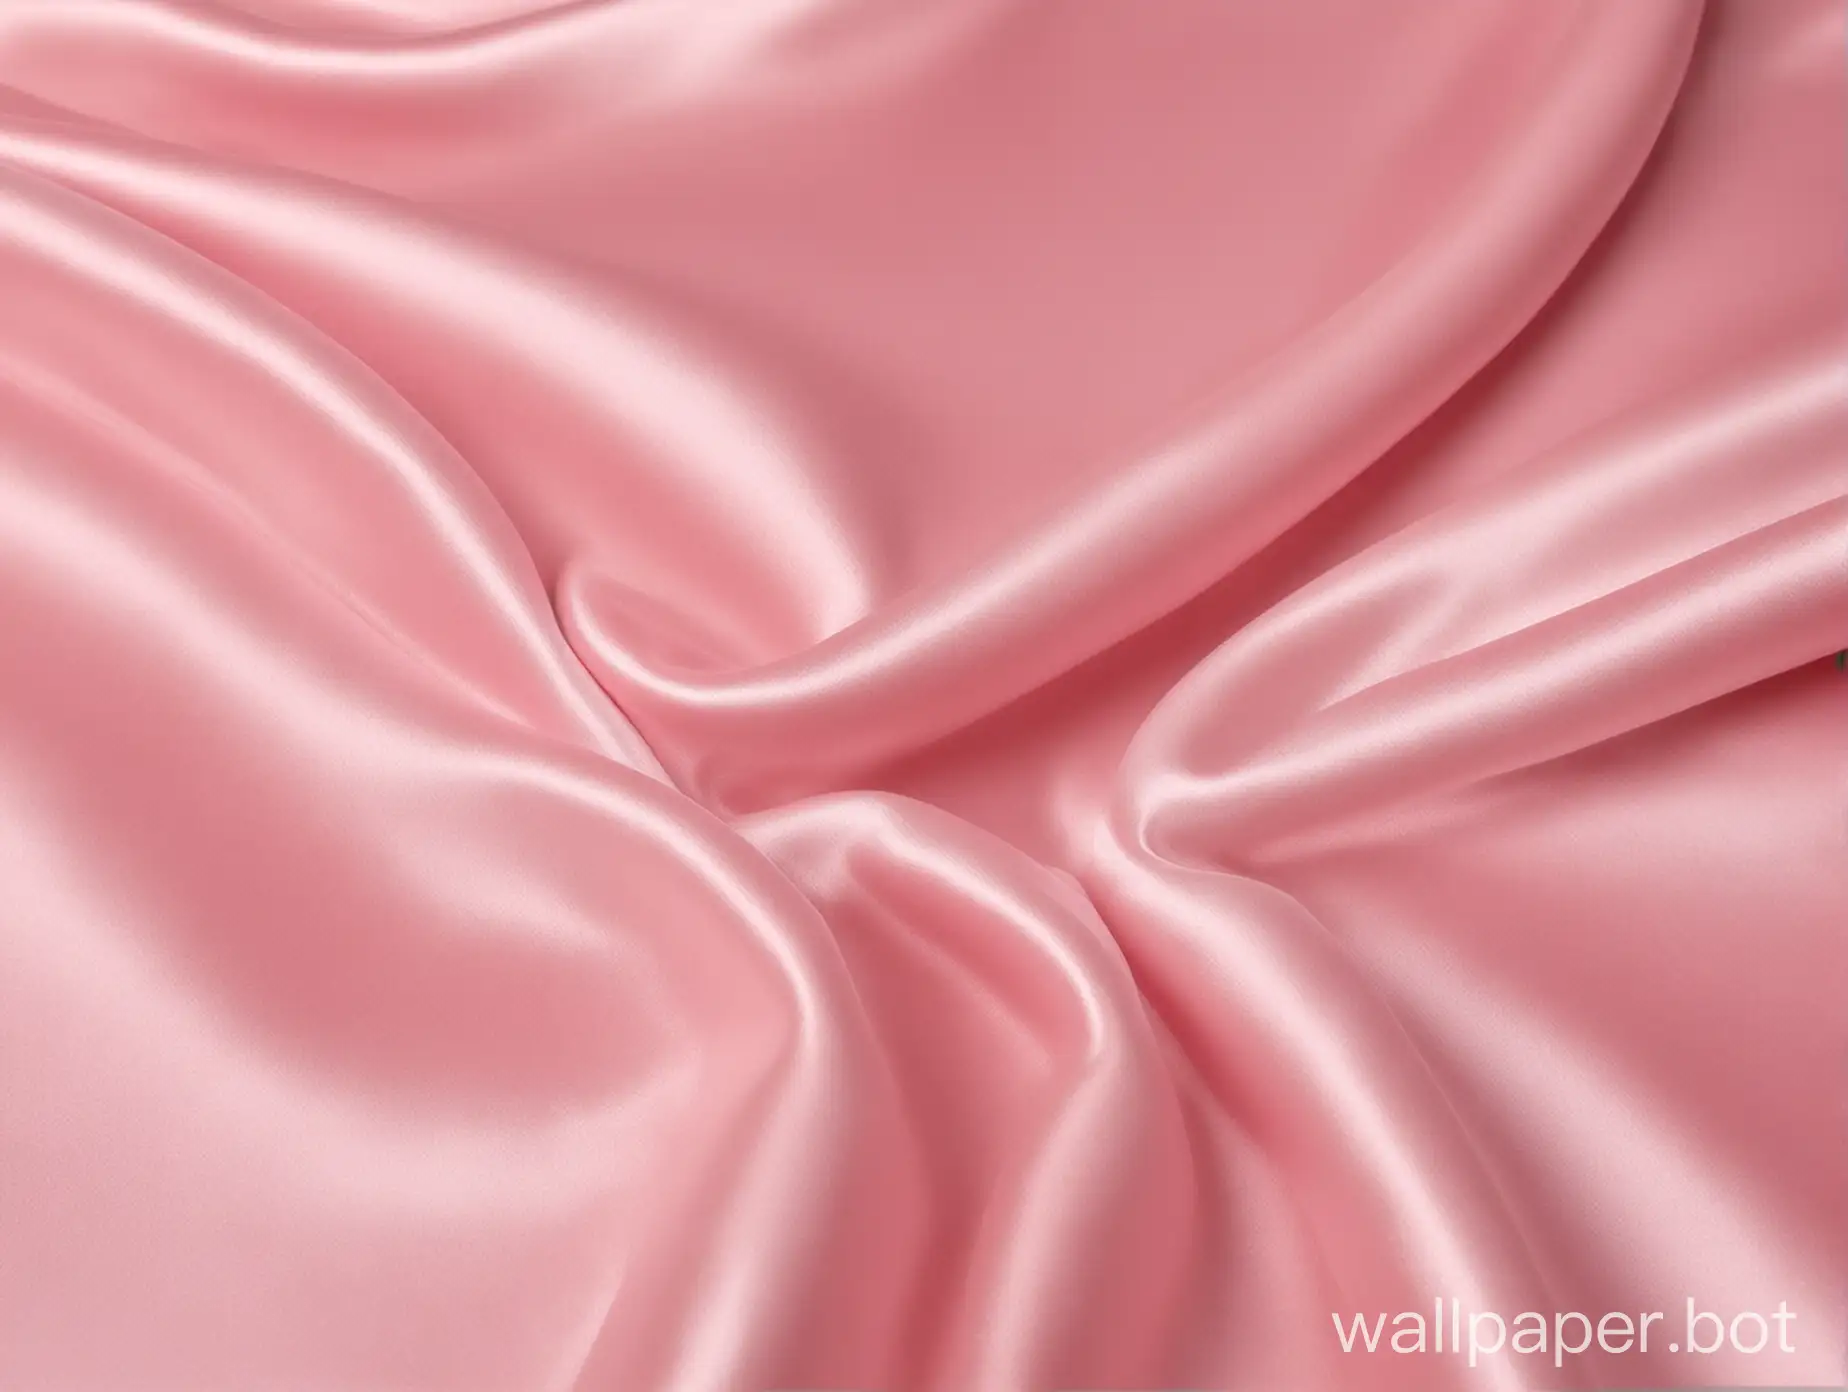 Soft-Pink-Mulberry-Silk-Bed-Fetish-Sensual-Relaxation-in-Luxurious-Surroundings